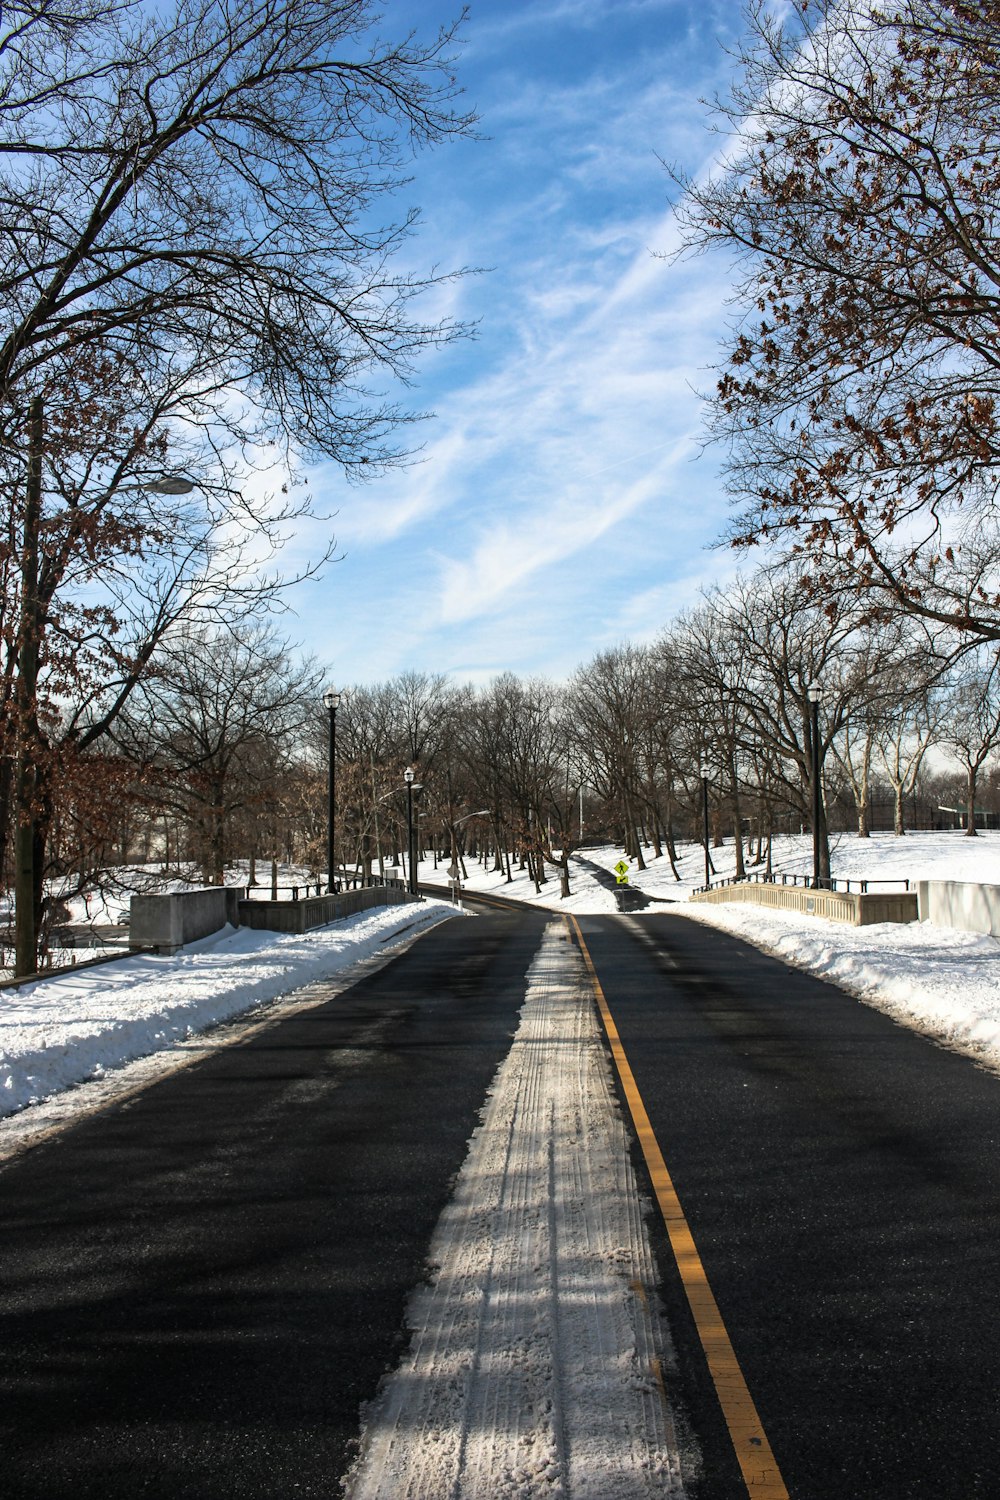 a street with snow on the ground and trees in the background